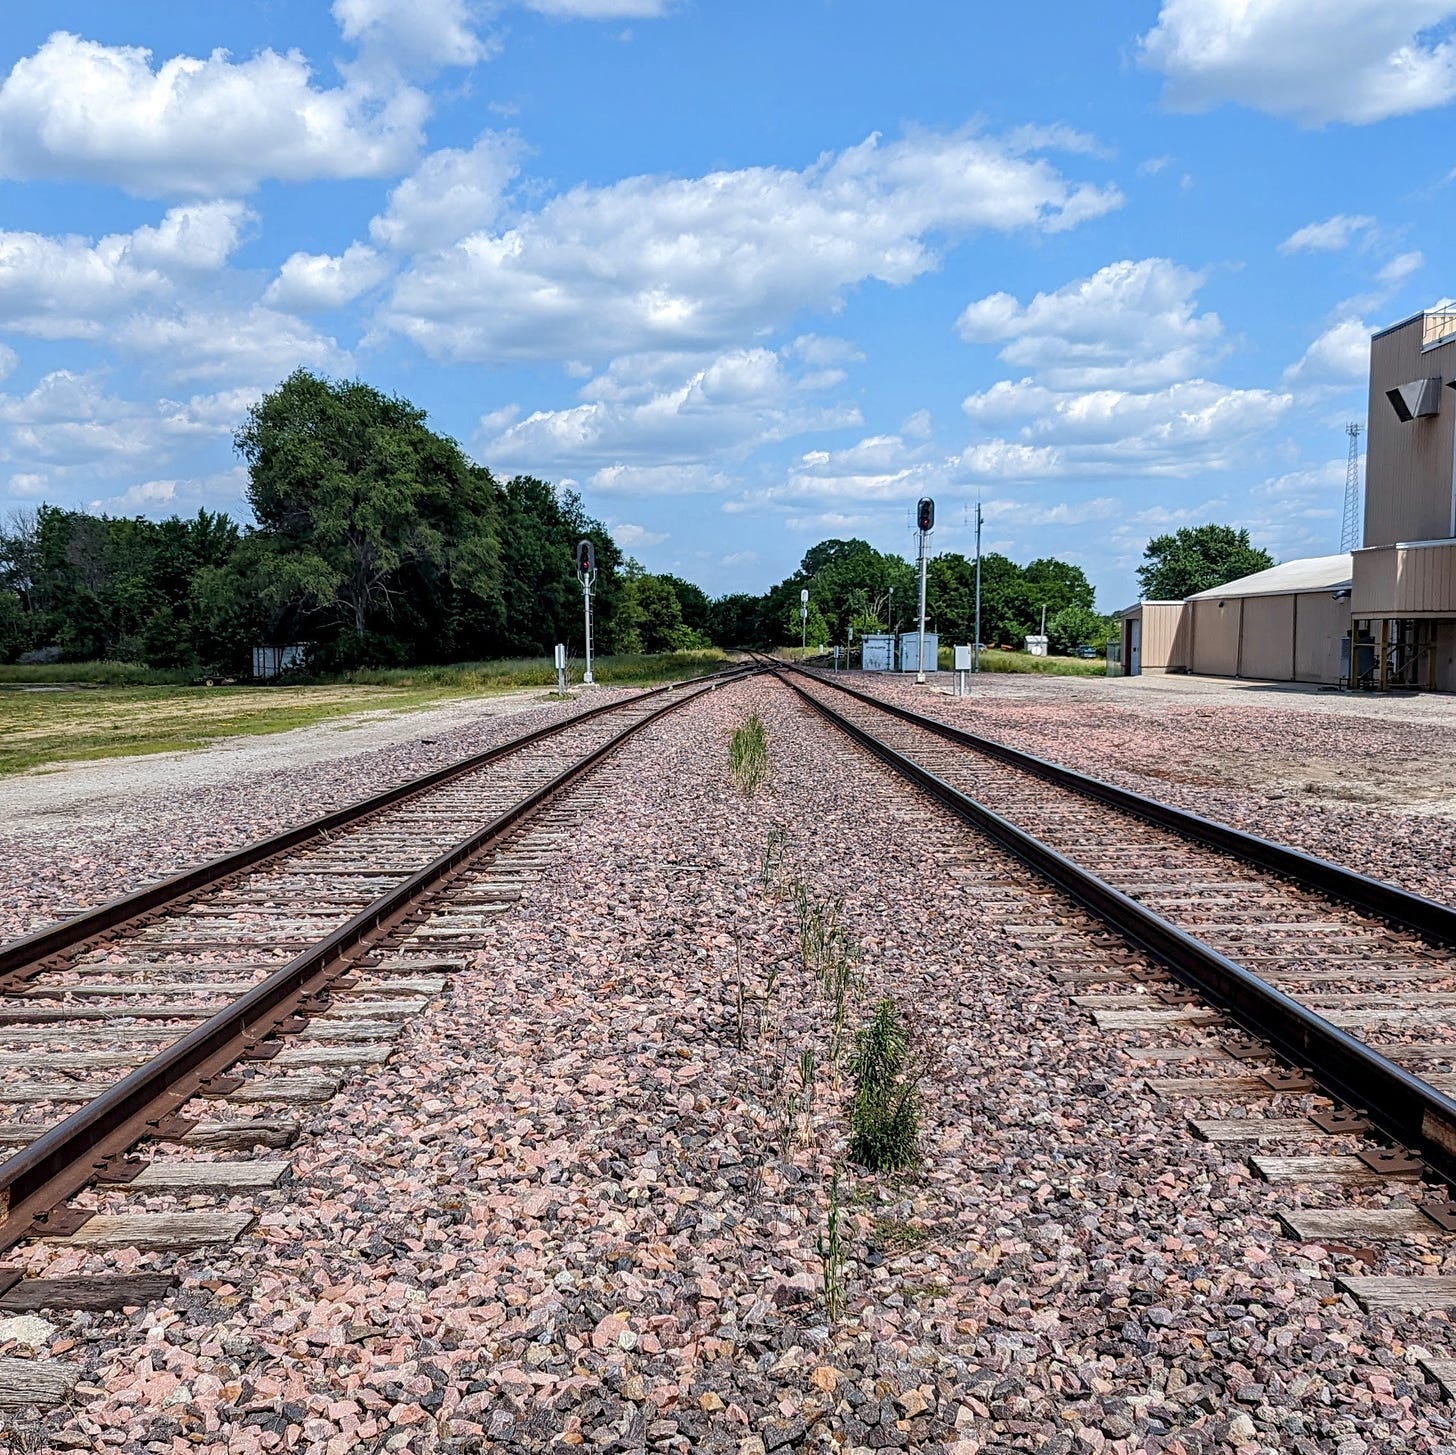 Two rows of train tracks, with gravel between them. Trees are on the left, and a building is on the right.